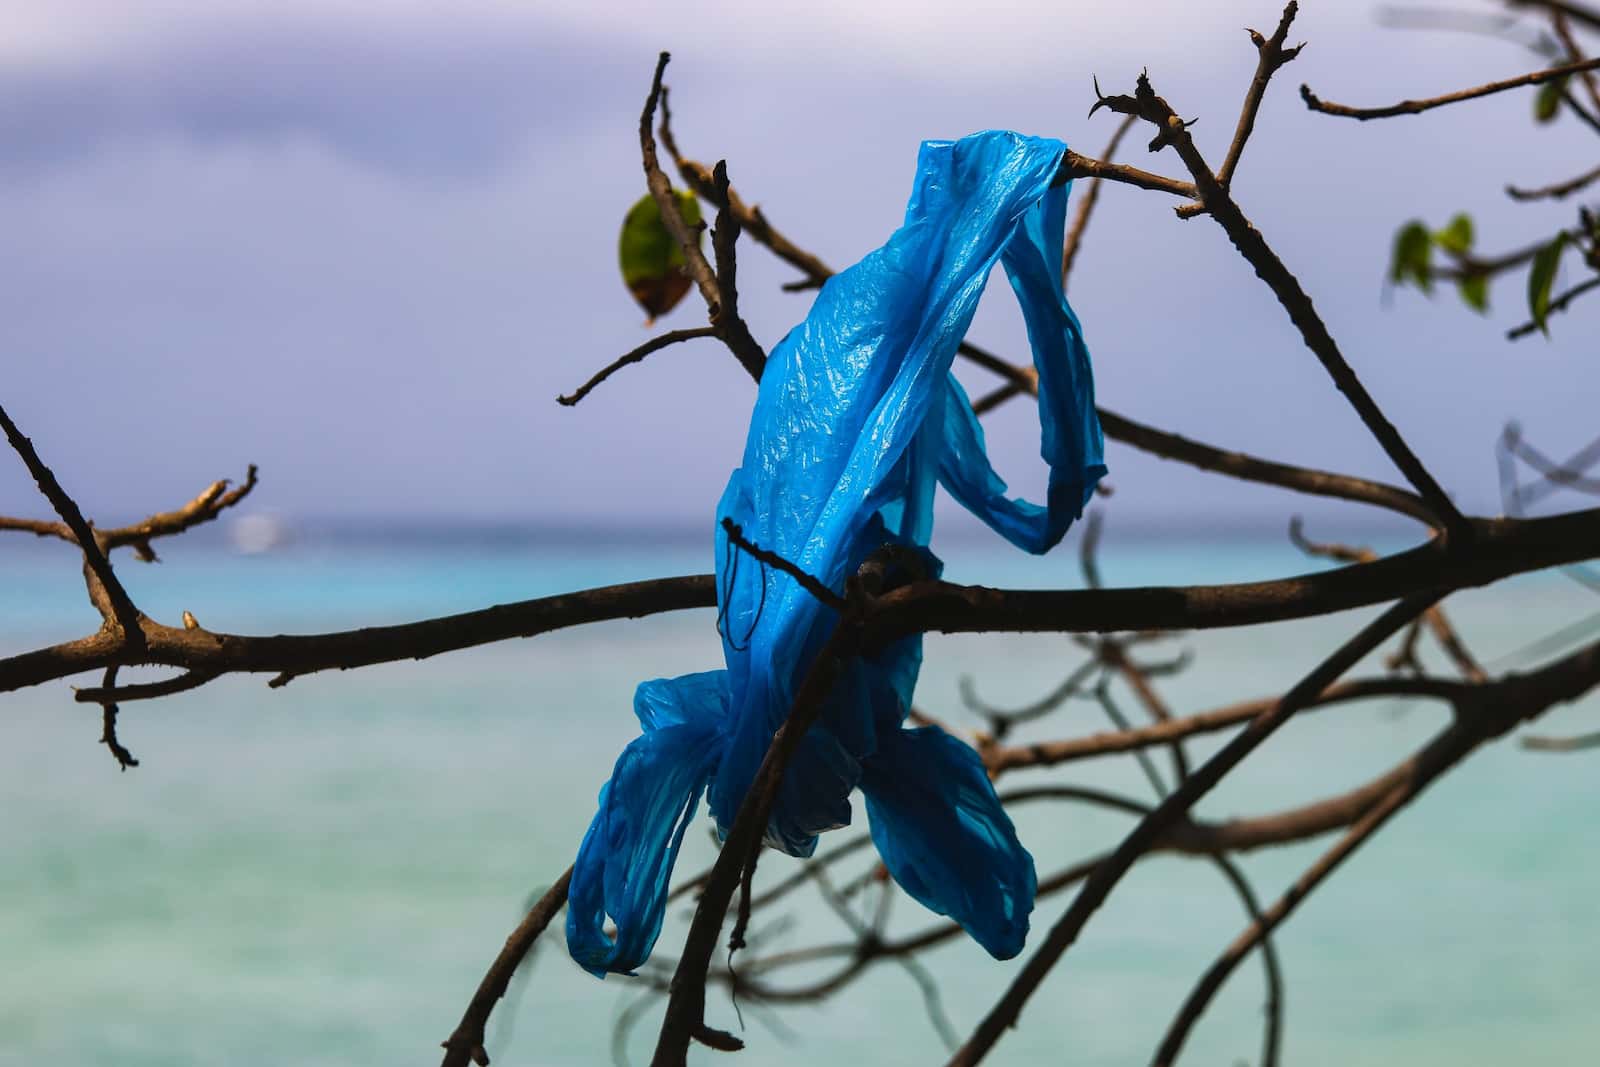 A blue plastic bag caught in a set of seaside branches.